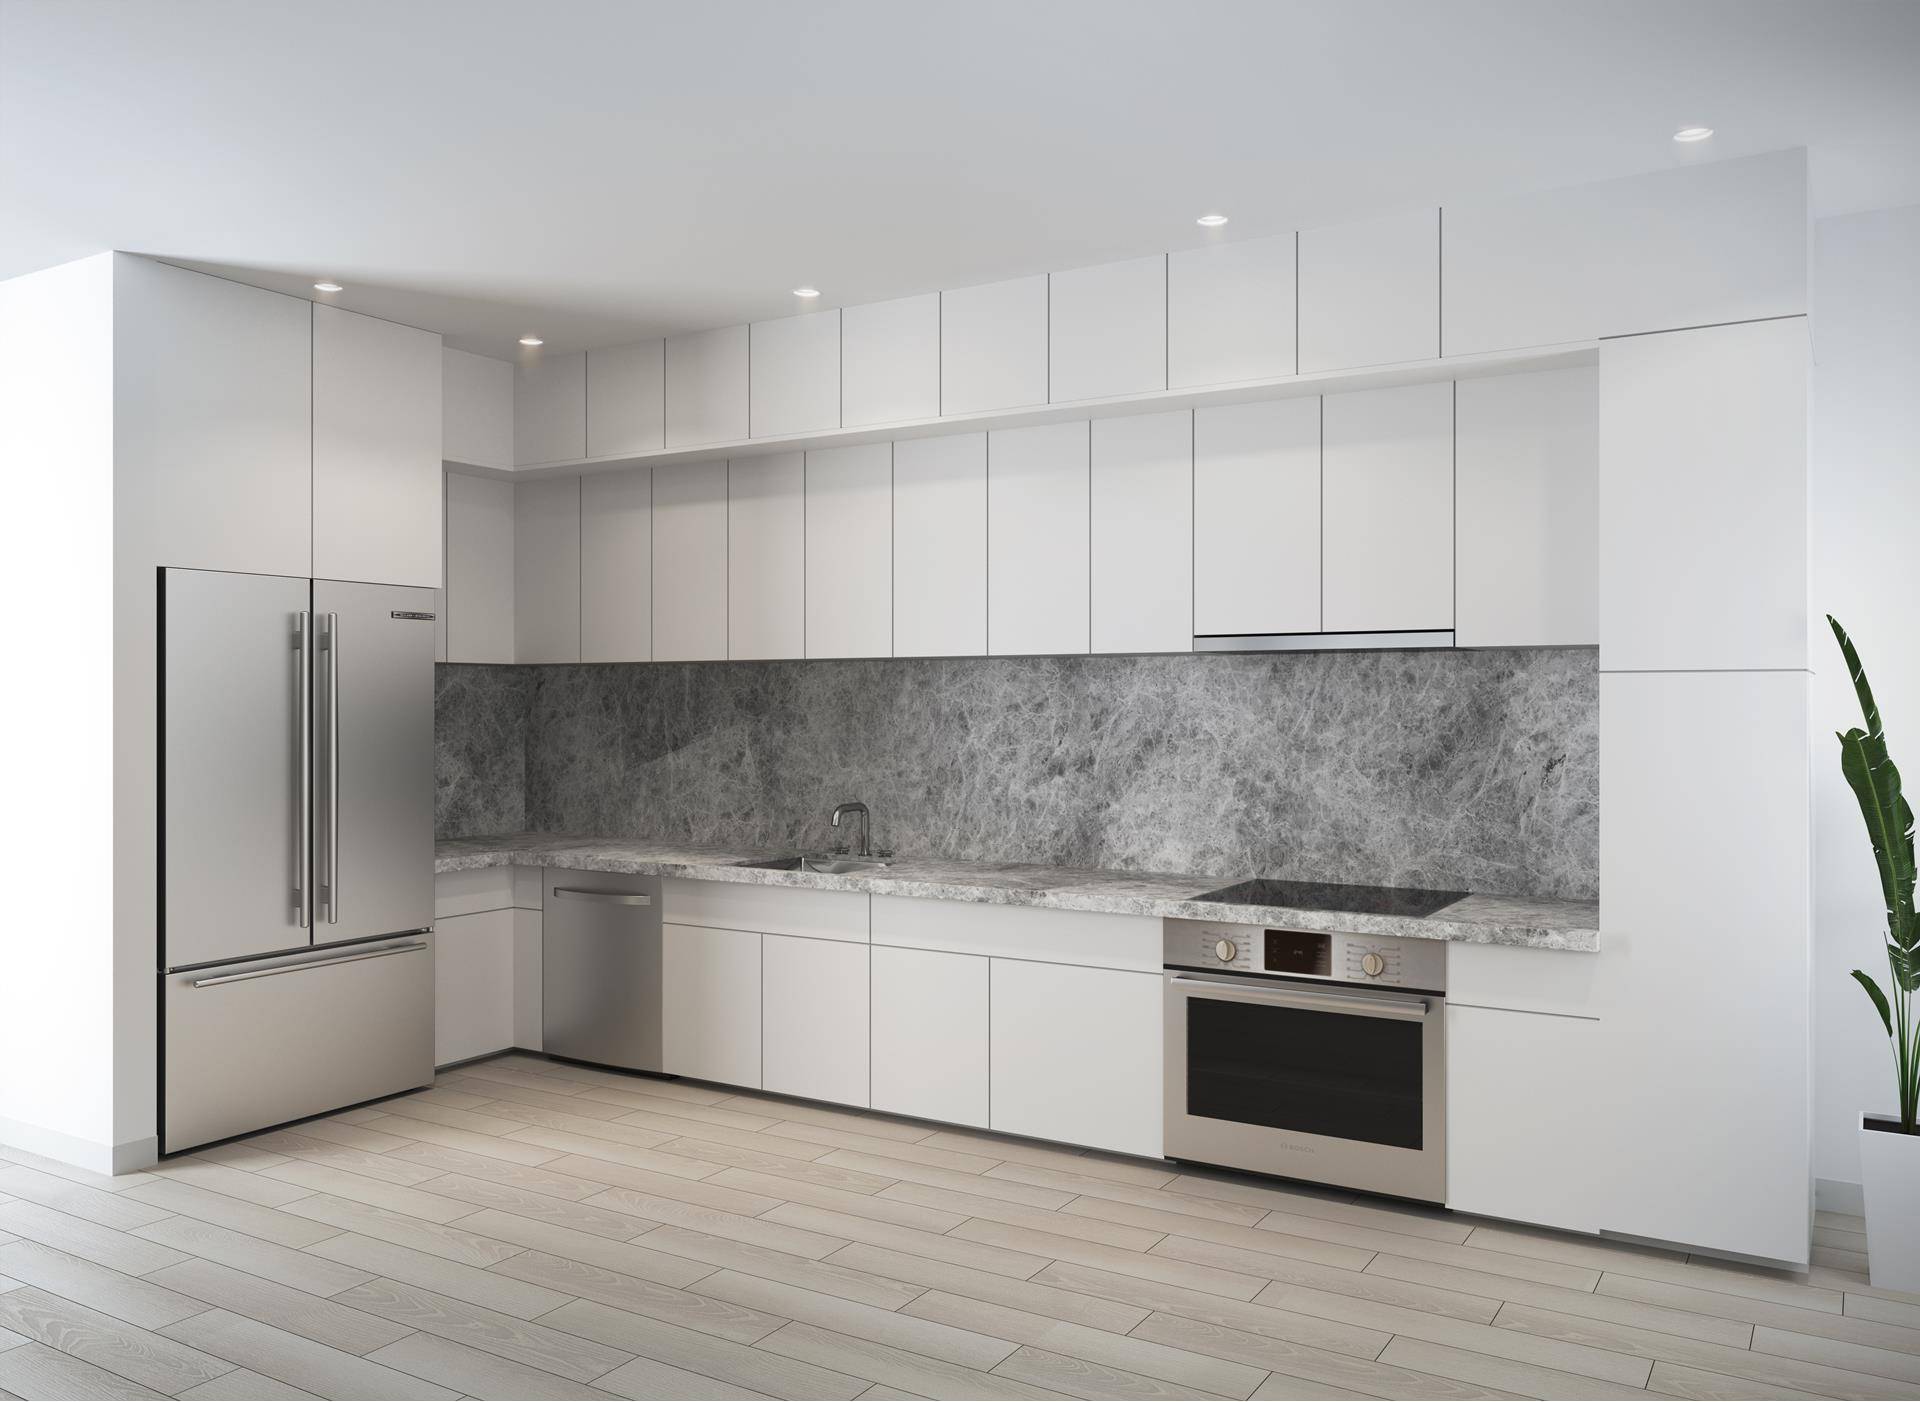 MODEL UNITS AVAILABLE FOR VIEWING OCCUPANCY Q1 2021 Alfred on Fleet, 112 Fleet PlaceAn exclusive opportunity awaits at the brand new Alfred on Fleet ?